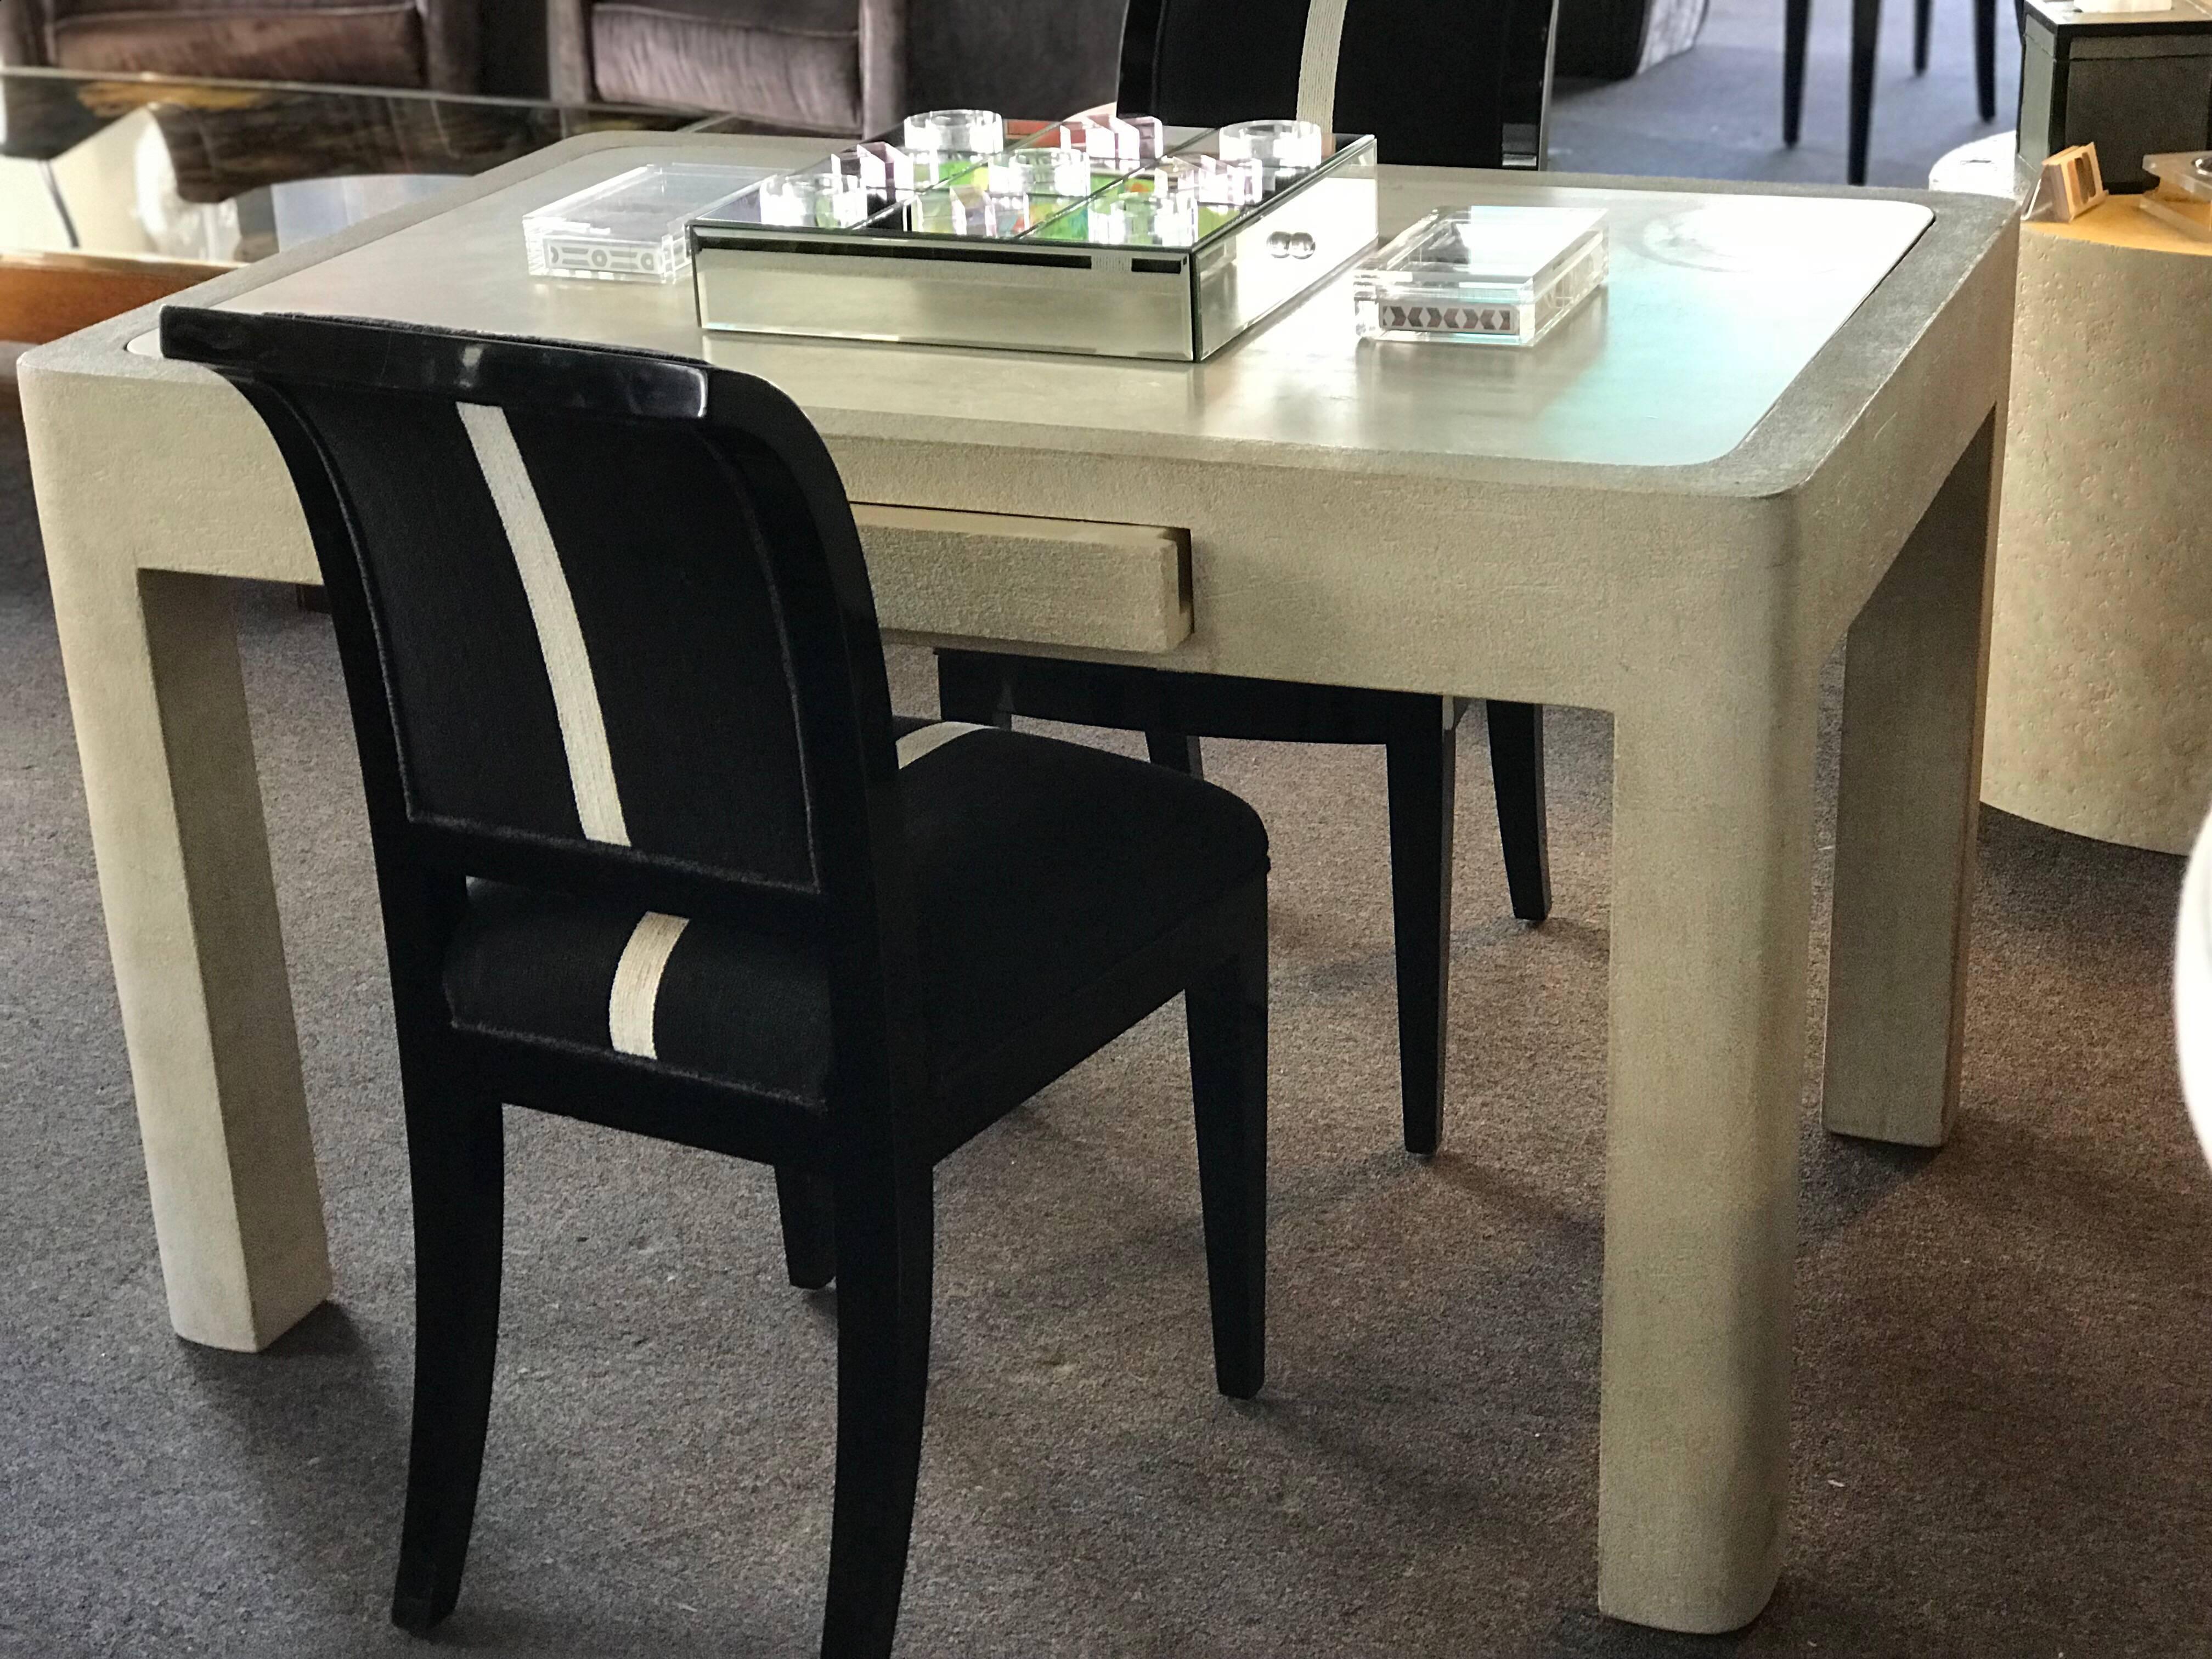 A custom one of a kind game table from the Rancho Mirage estate of Barbara Sinatra. The table was moved from the Frank and Barbara Estate after he passed away. This beautiful wood base has a plaster look finish, topped off with a beautiful Italian